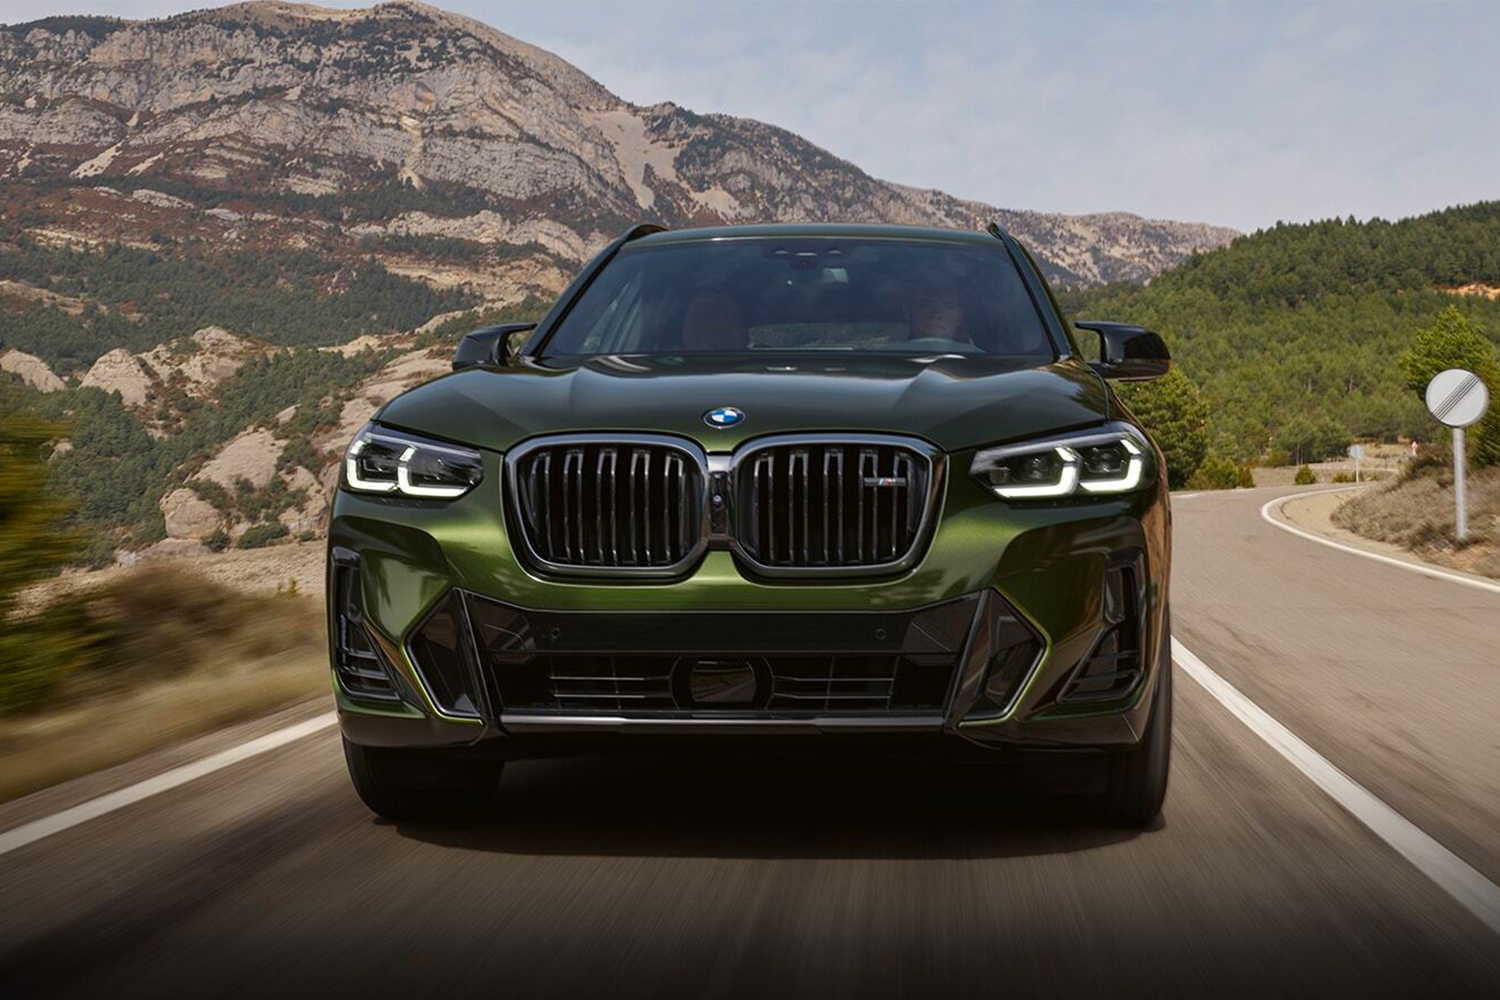 restaurant Uittreksel wetgeving Review: Is the 2022 BMW X3 M40i SUV Too Powerful? - InsideHook